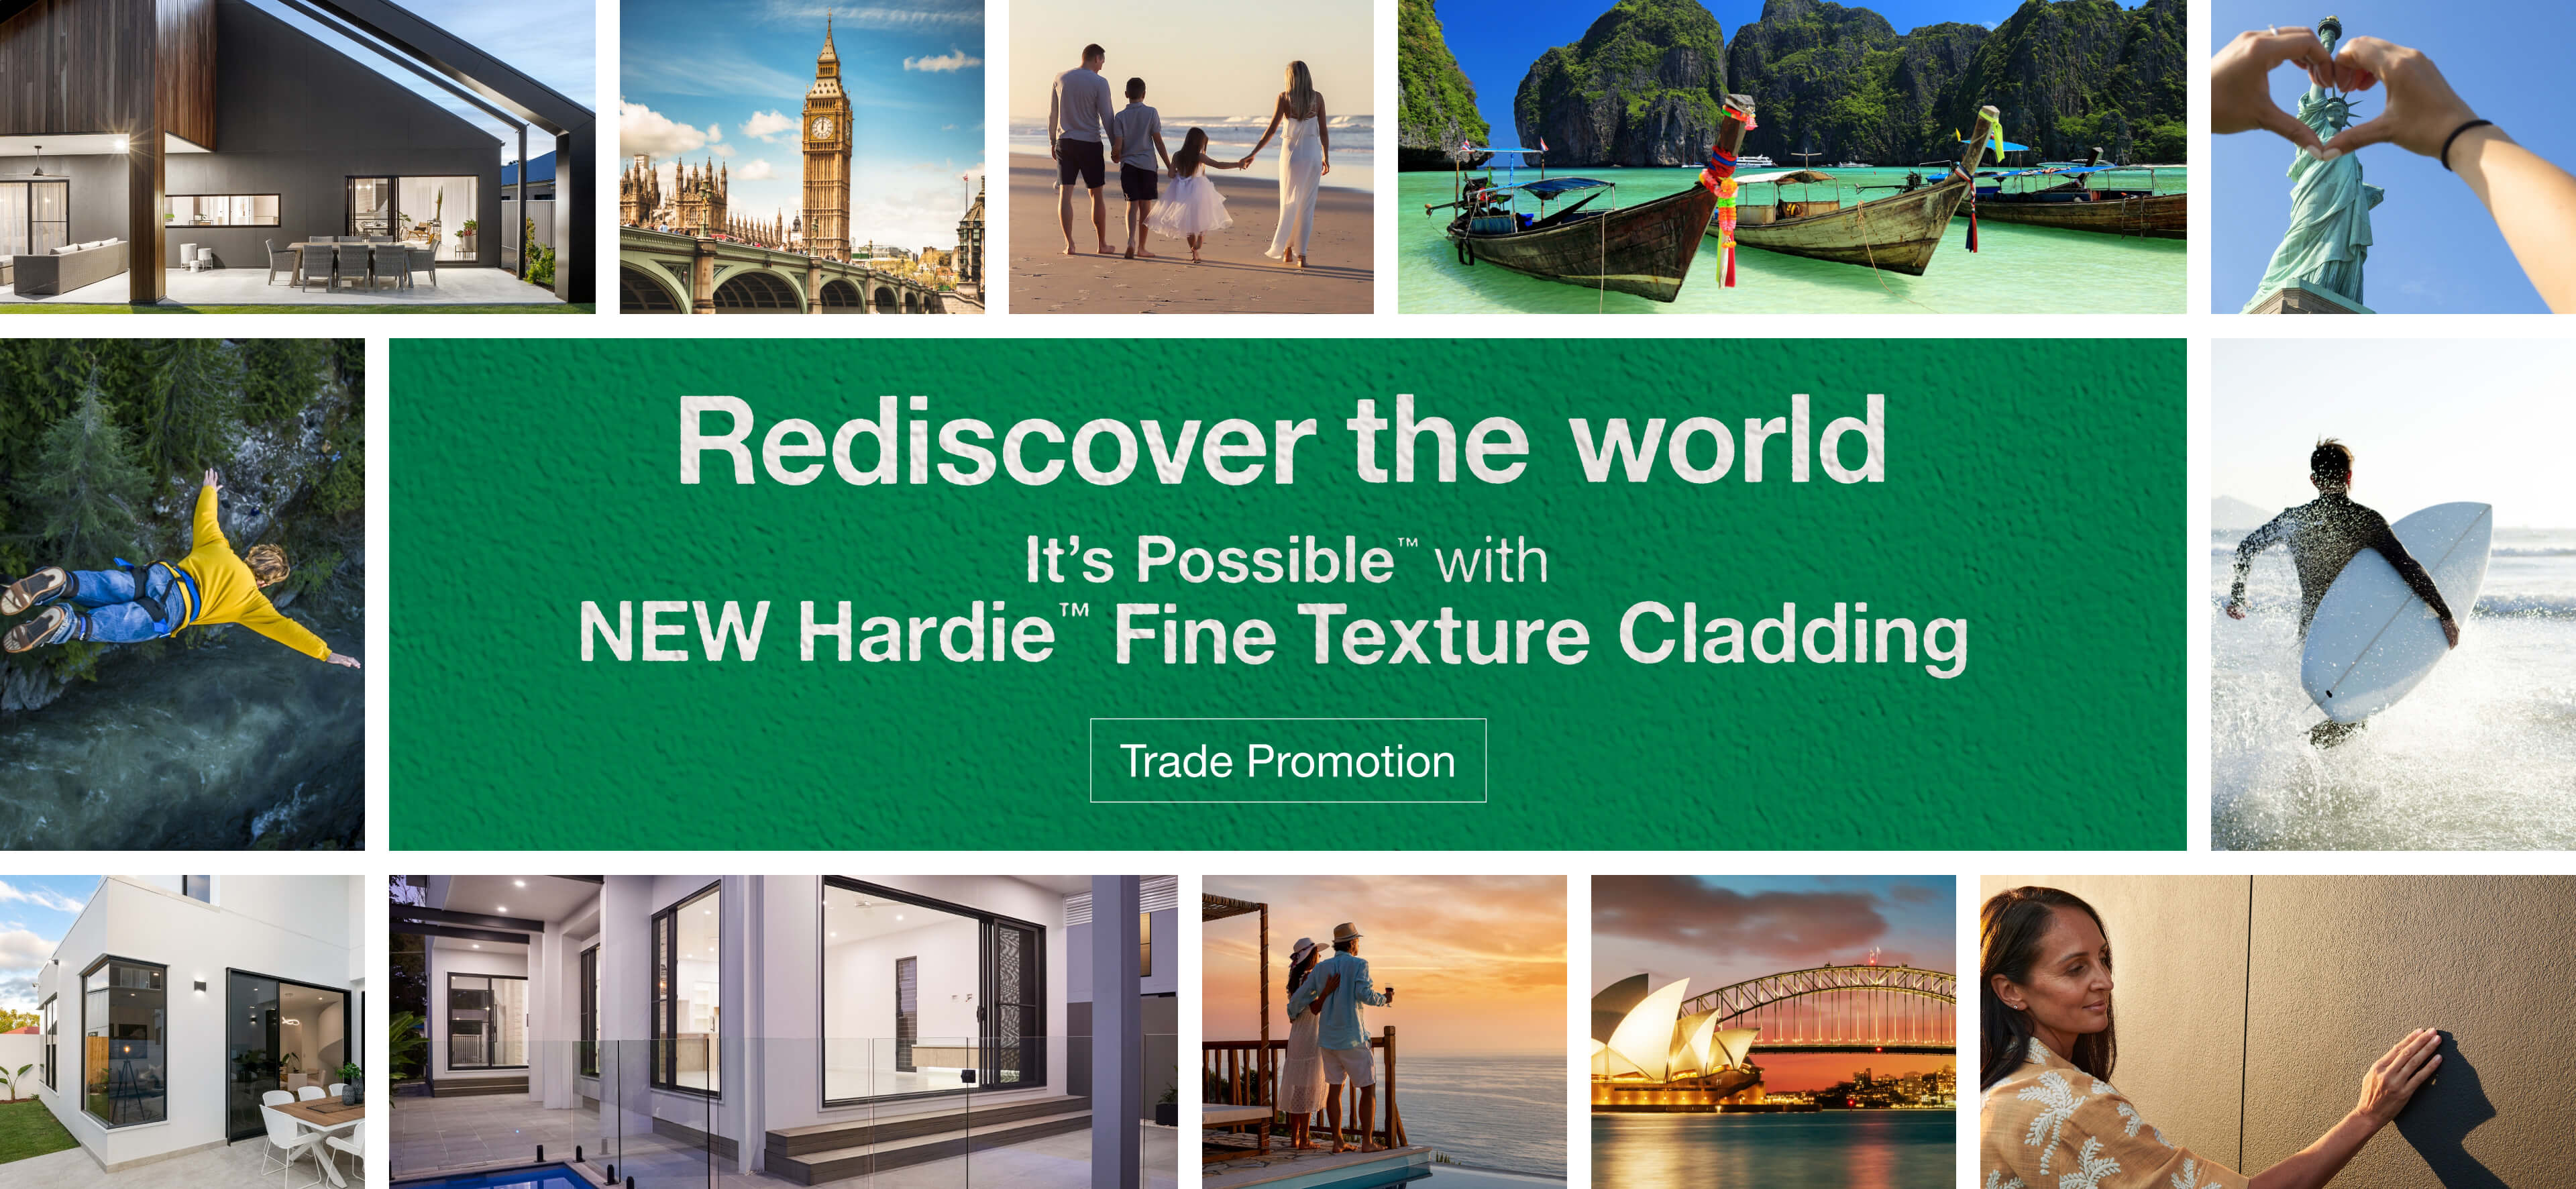 James Hardie Rediscover the World - Win a $20,000 Holiday with Hardie Fine Texture Cladding